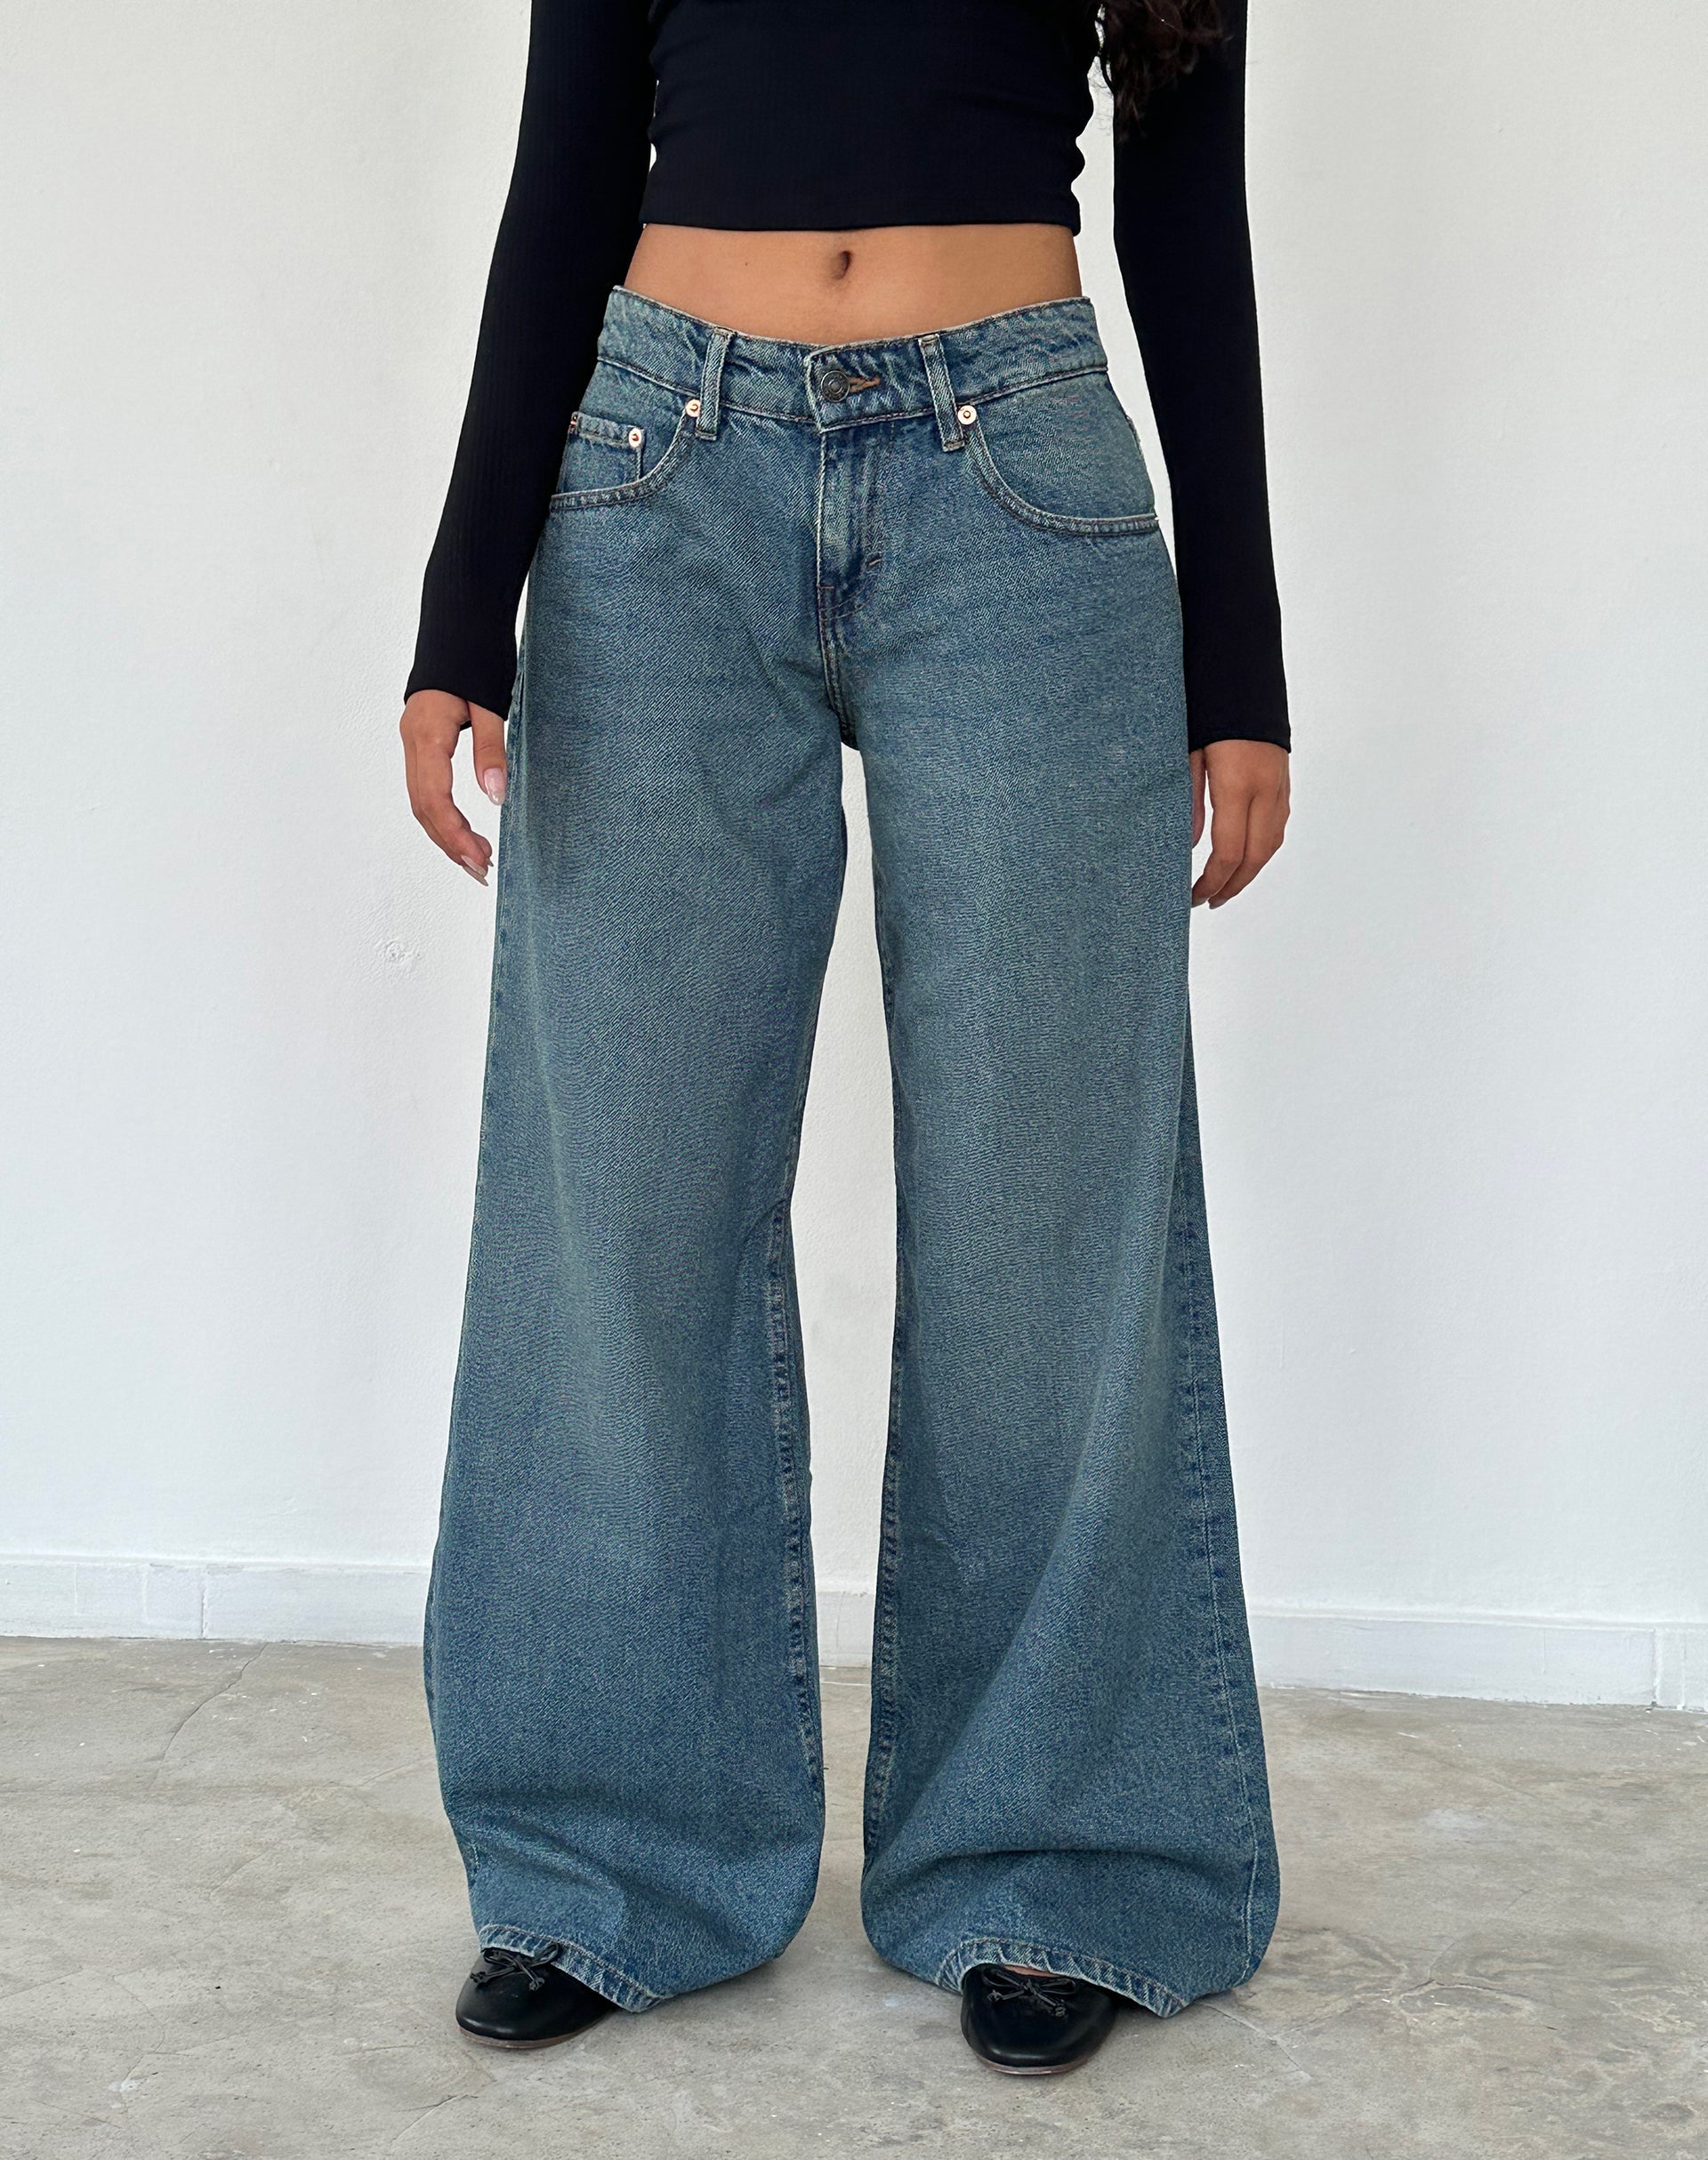 Buy Inky Blue Super Soft Denim Flare Jeans from Next USA